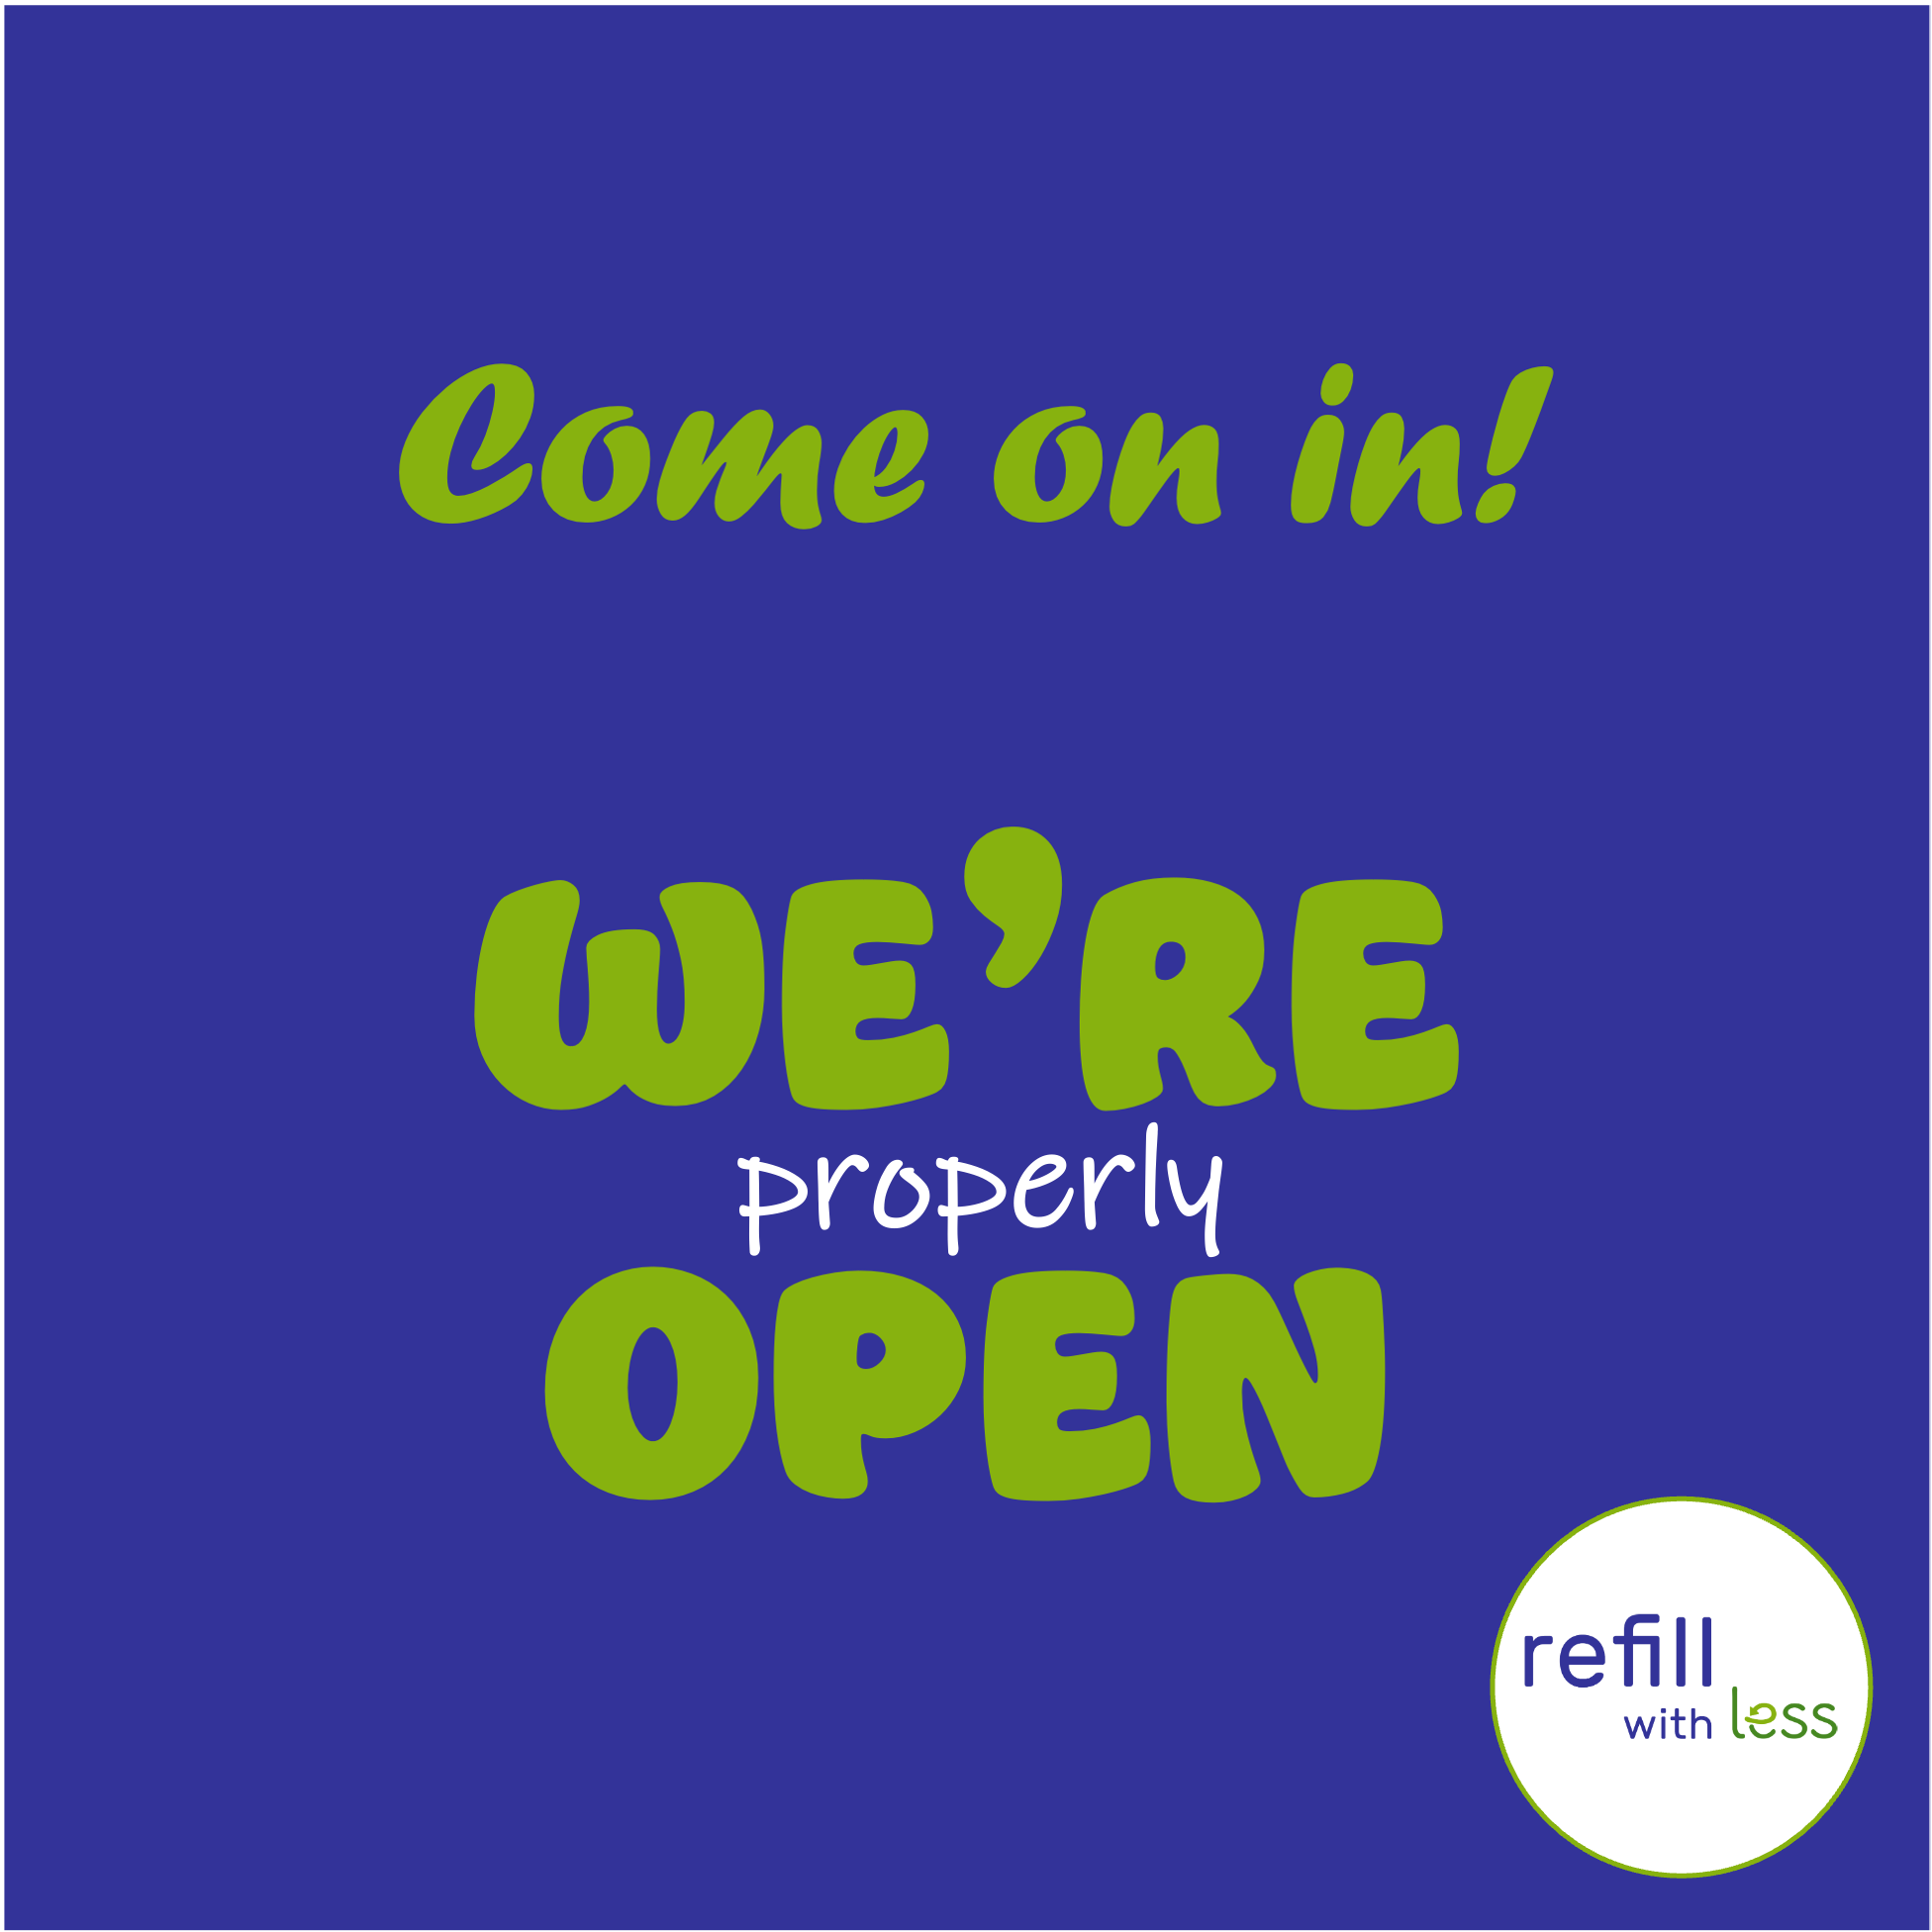 Refill With LESS is now open for business